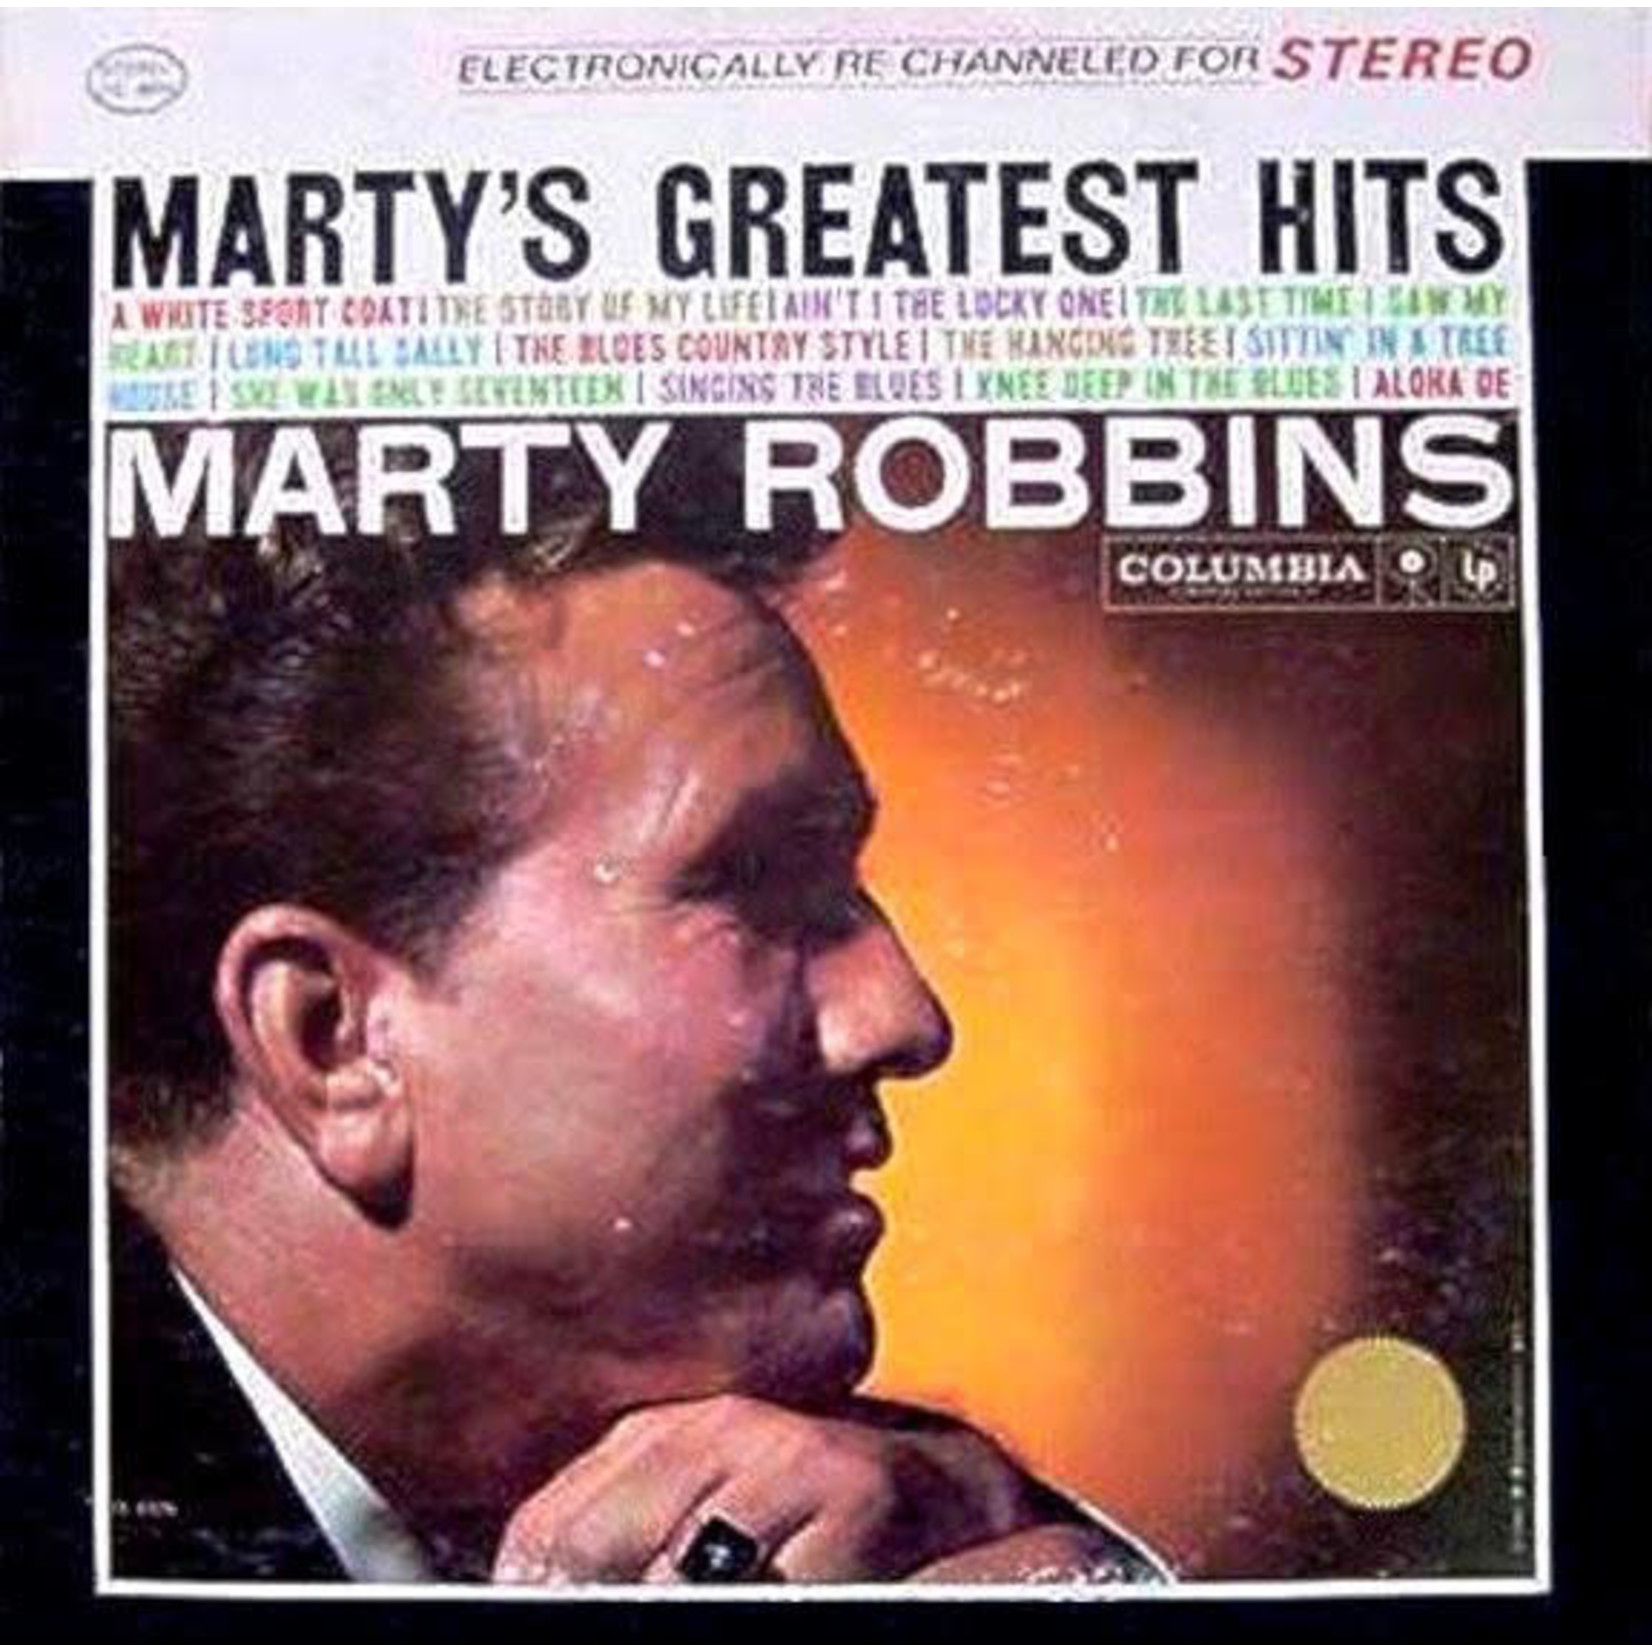 Marty Robbins Marty Robbins – Marty's Greatest Hits (G, LP, Stereo, Columbia CS 8639, Canada)